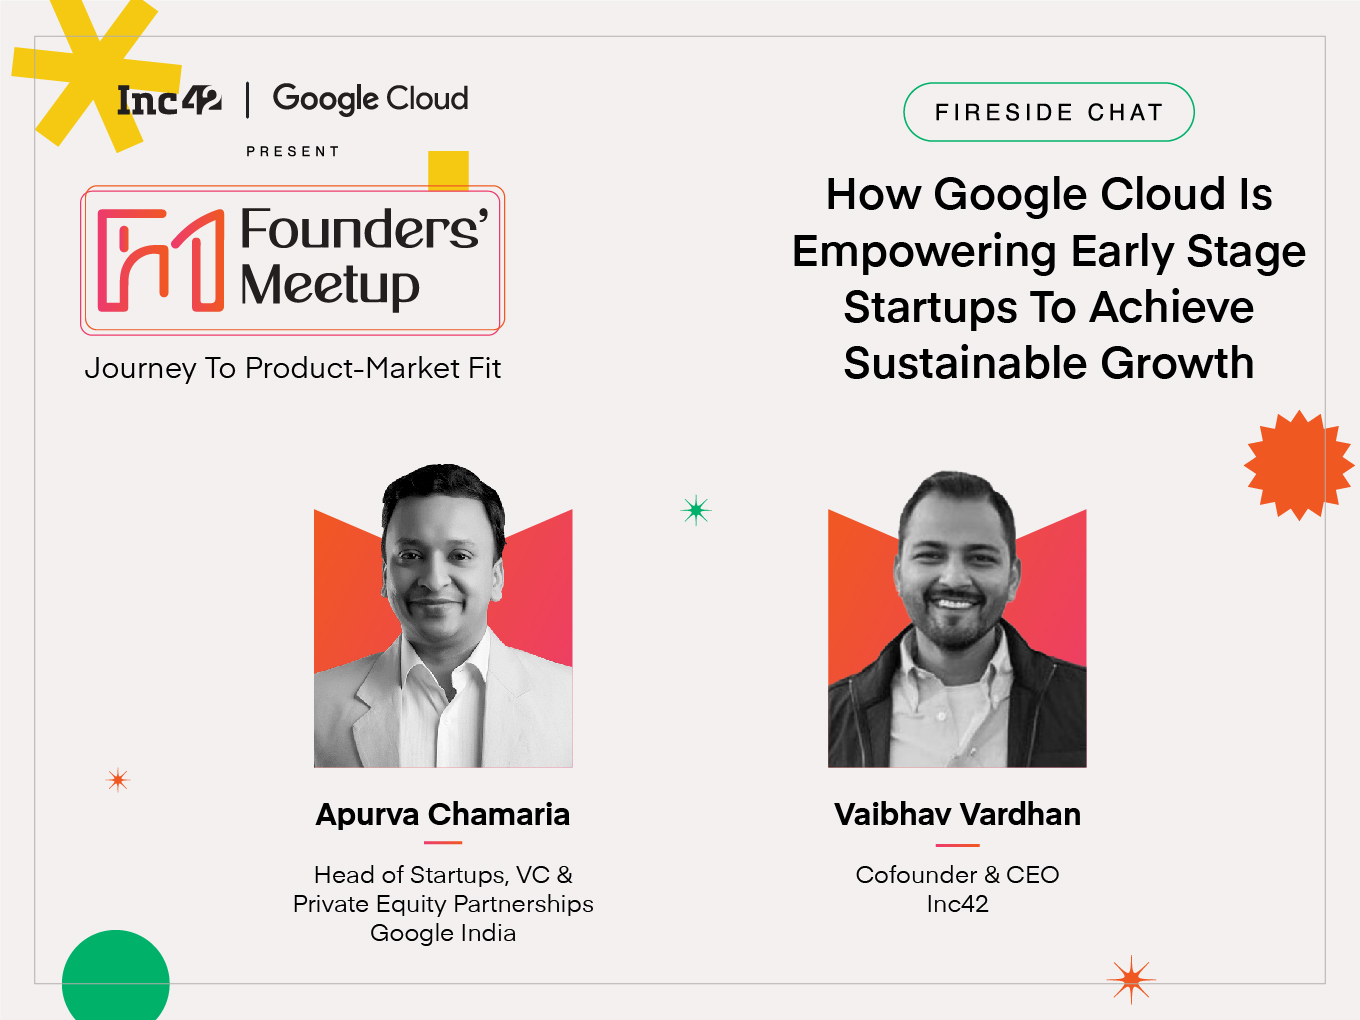 How Google Cloud Is Empowering Early Stage Startups To Achieve Sustainable Growth